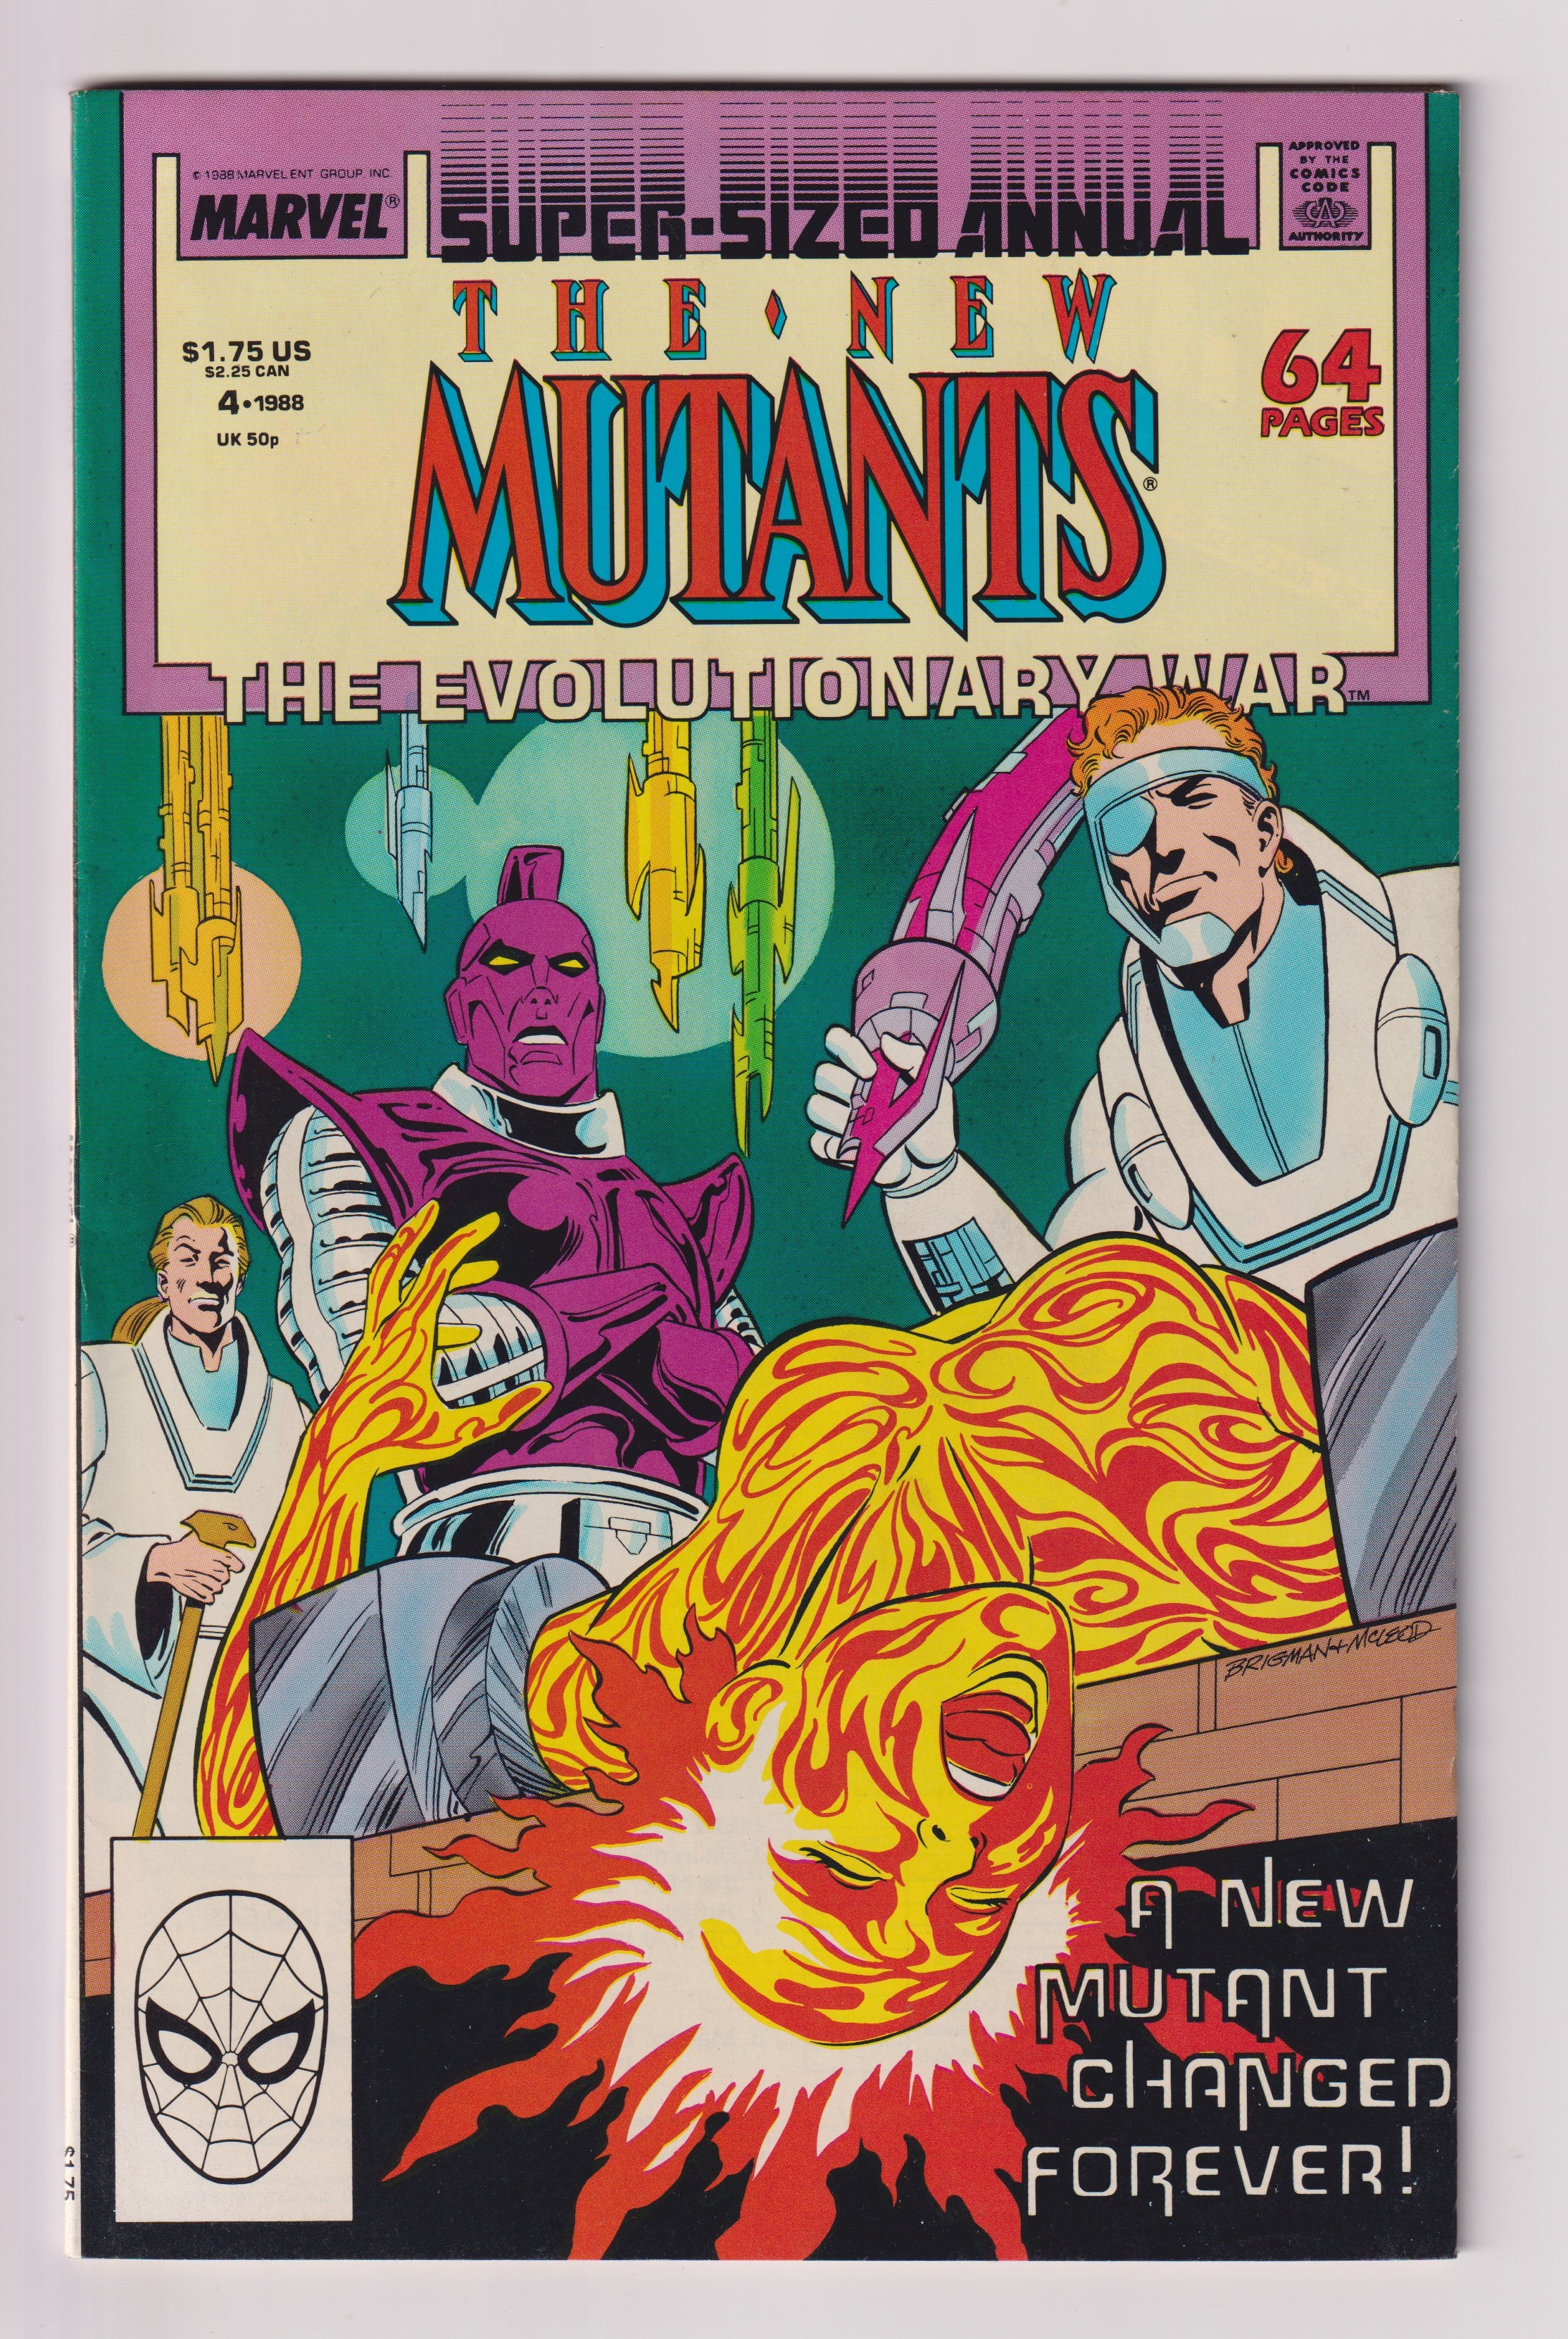 Photo of New Mutants, Vol. 1 Annual (1988)  Iss 4 Very Fine +  Comic sold by Stronghold Collectibles